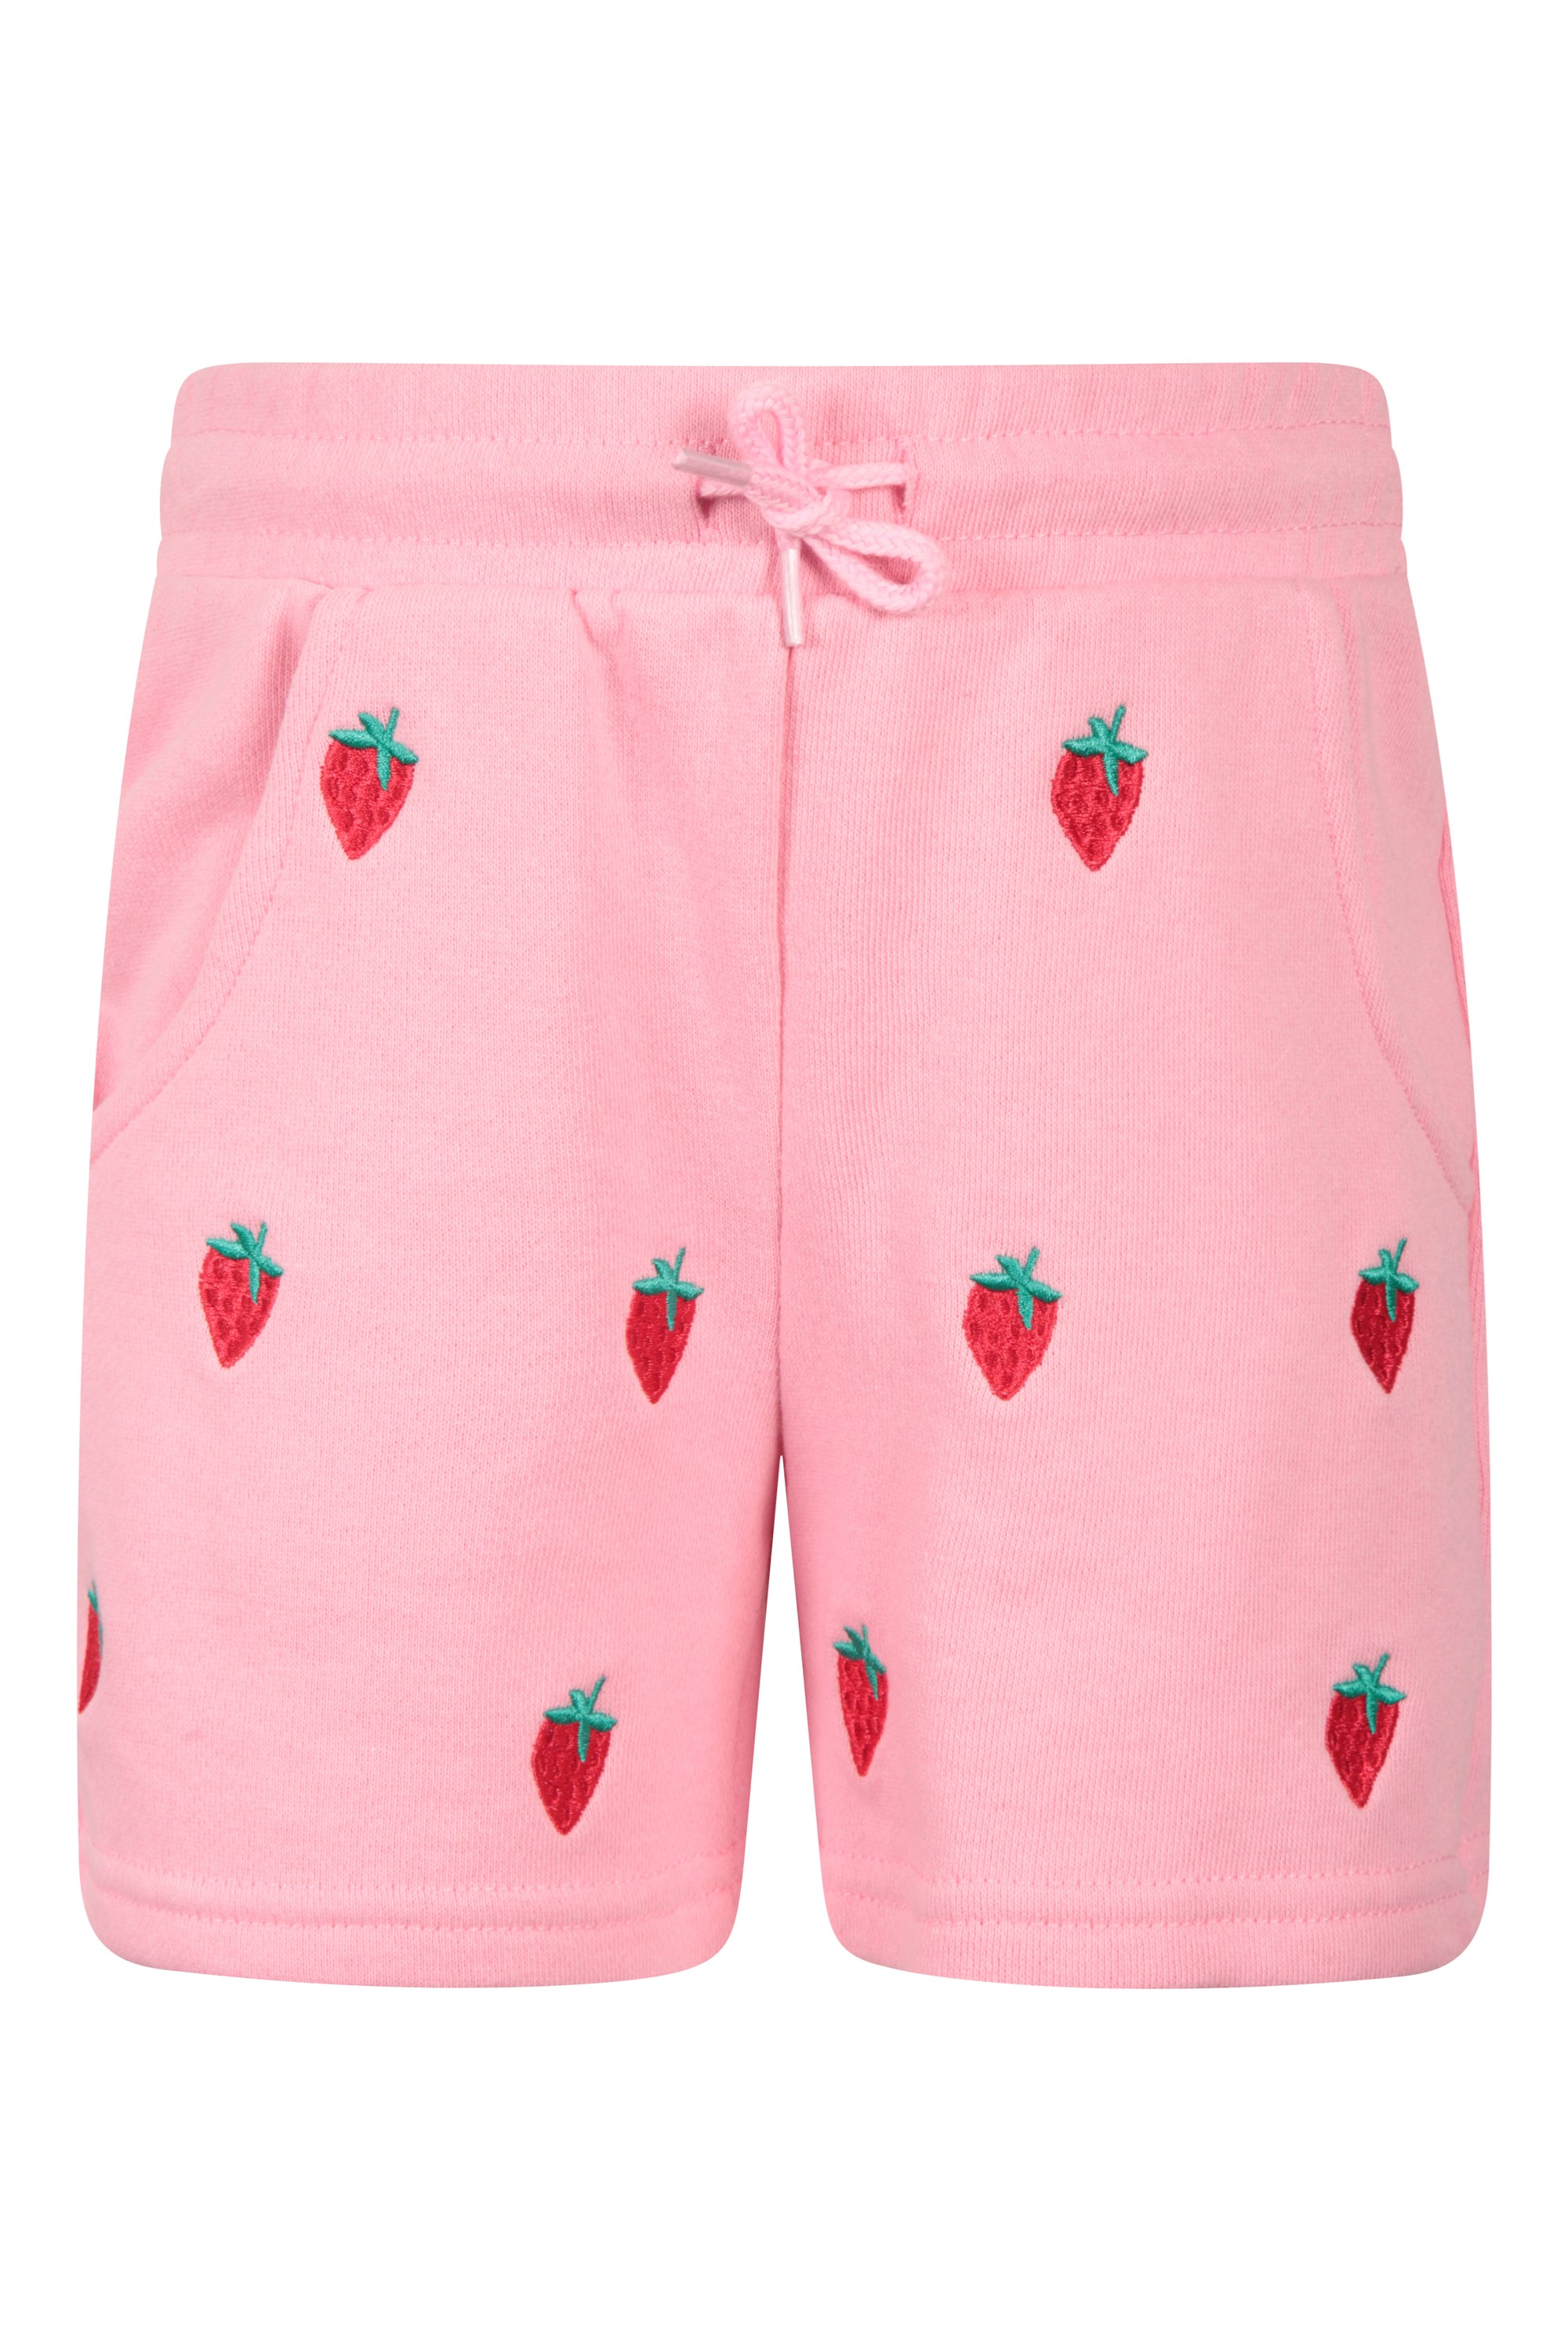 Strawberry Kids Embroidered Shorts - Pink